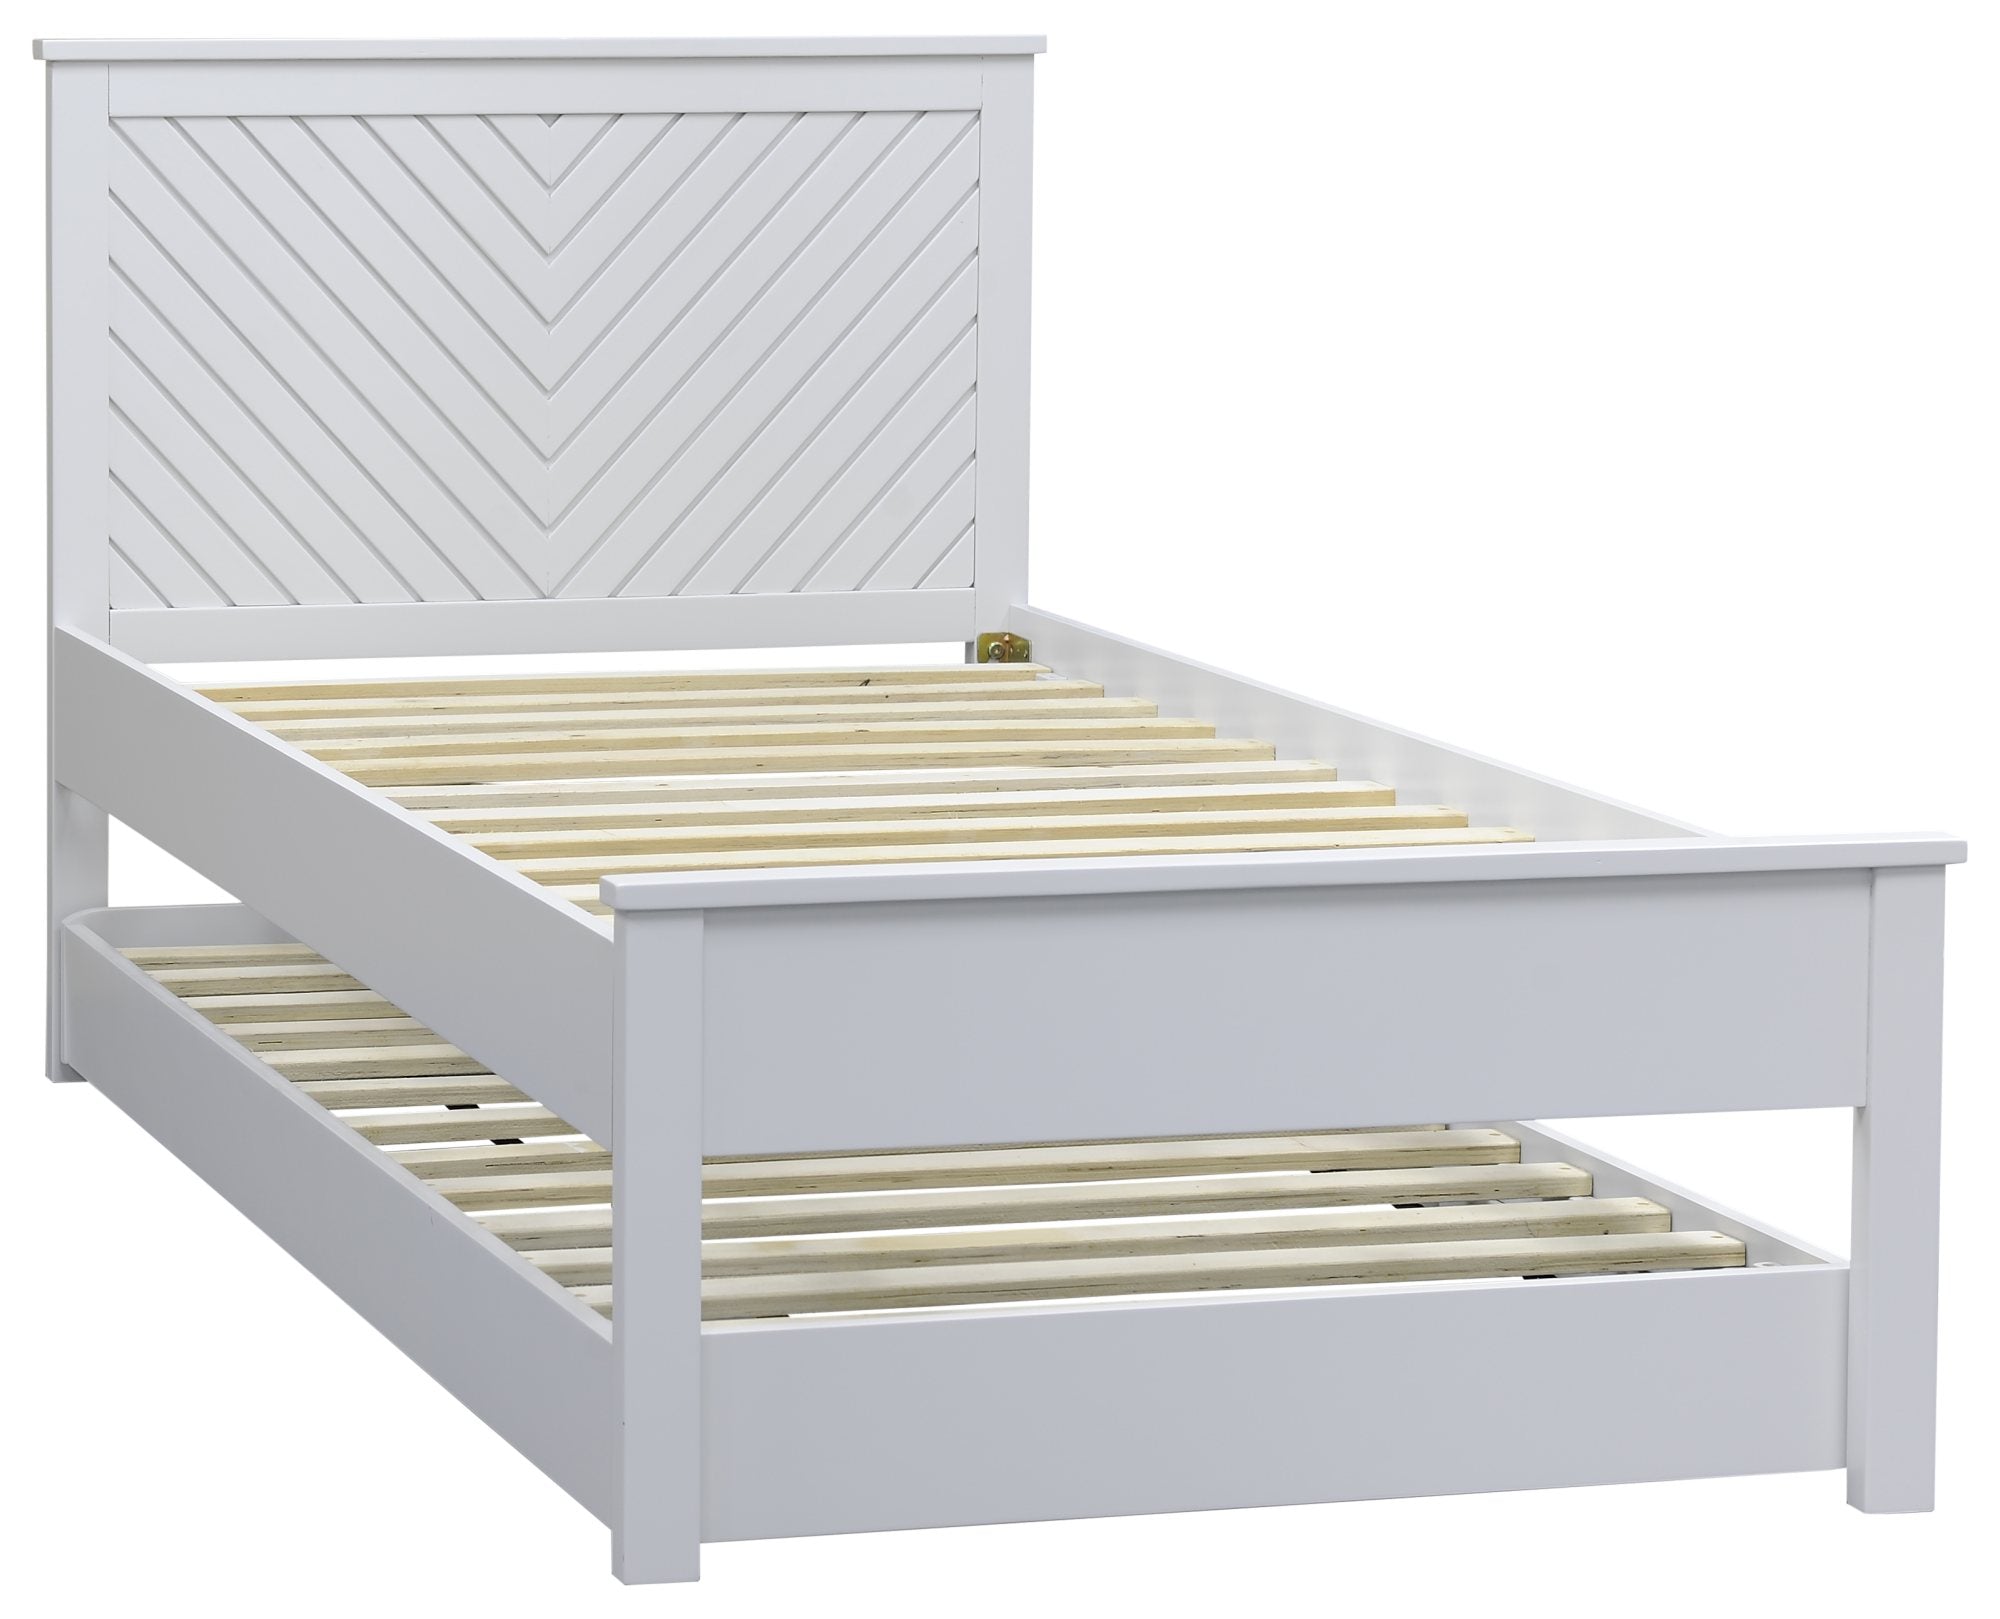 Chevron guest bed set up as a single bed